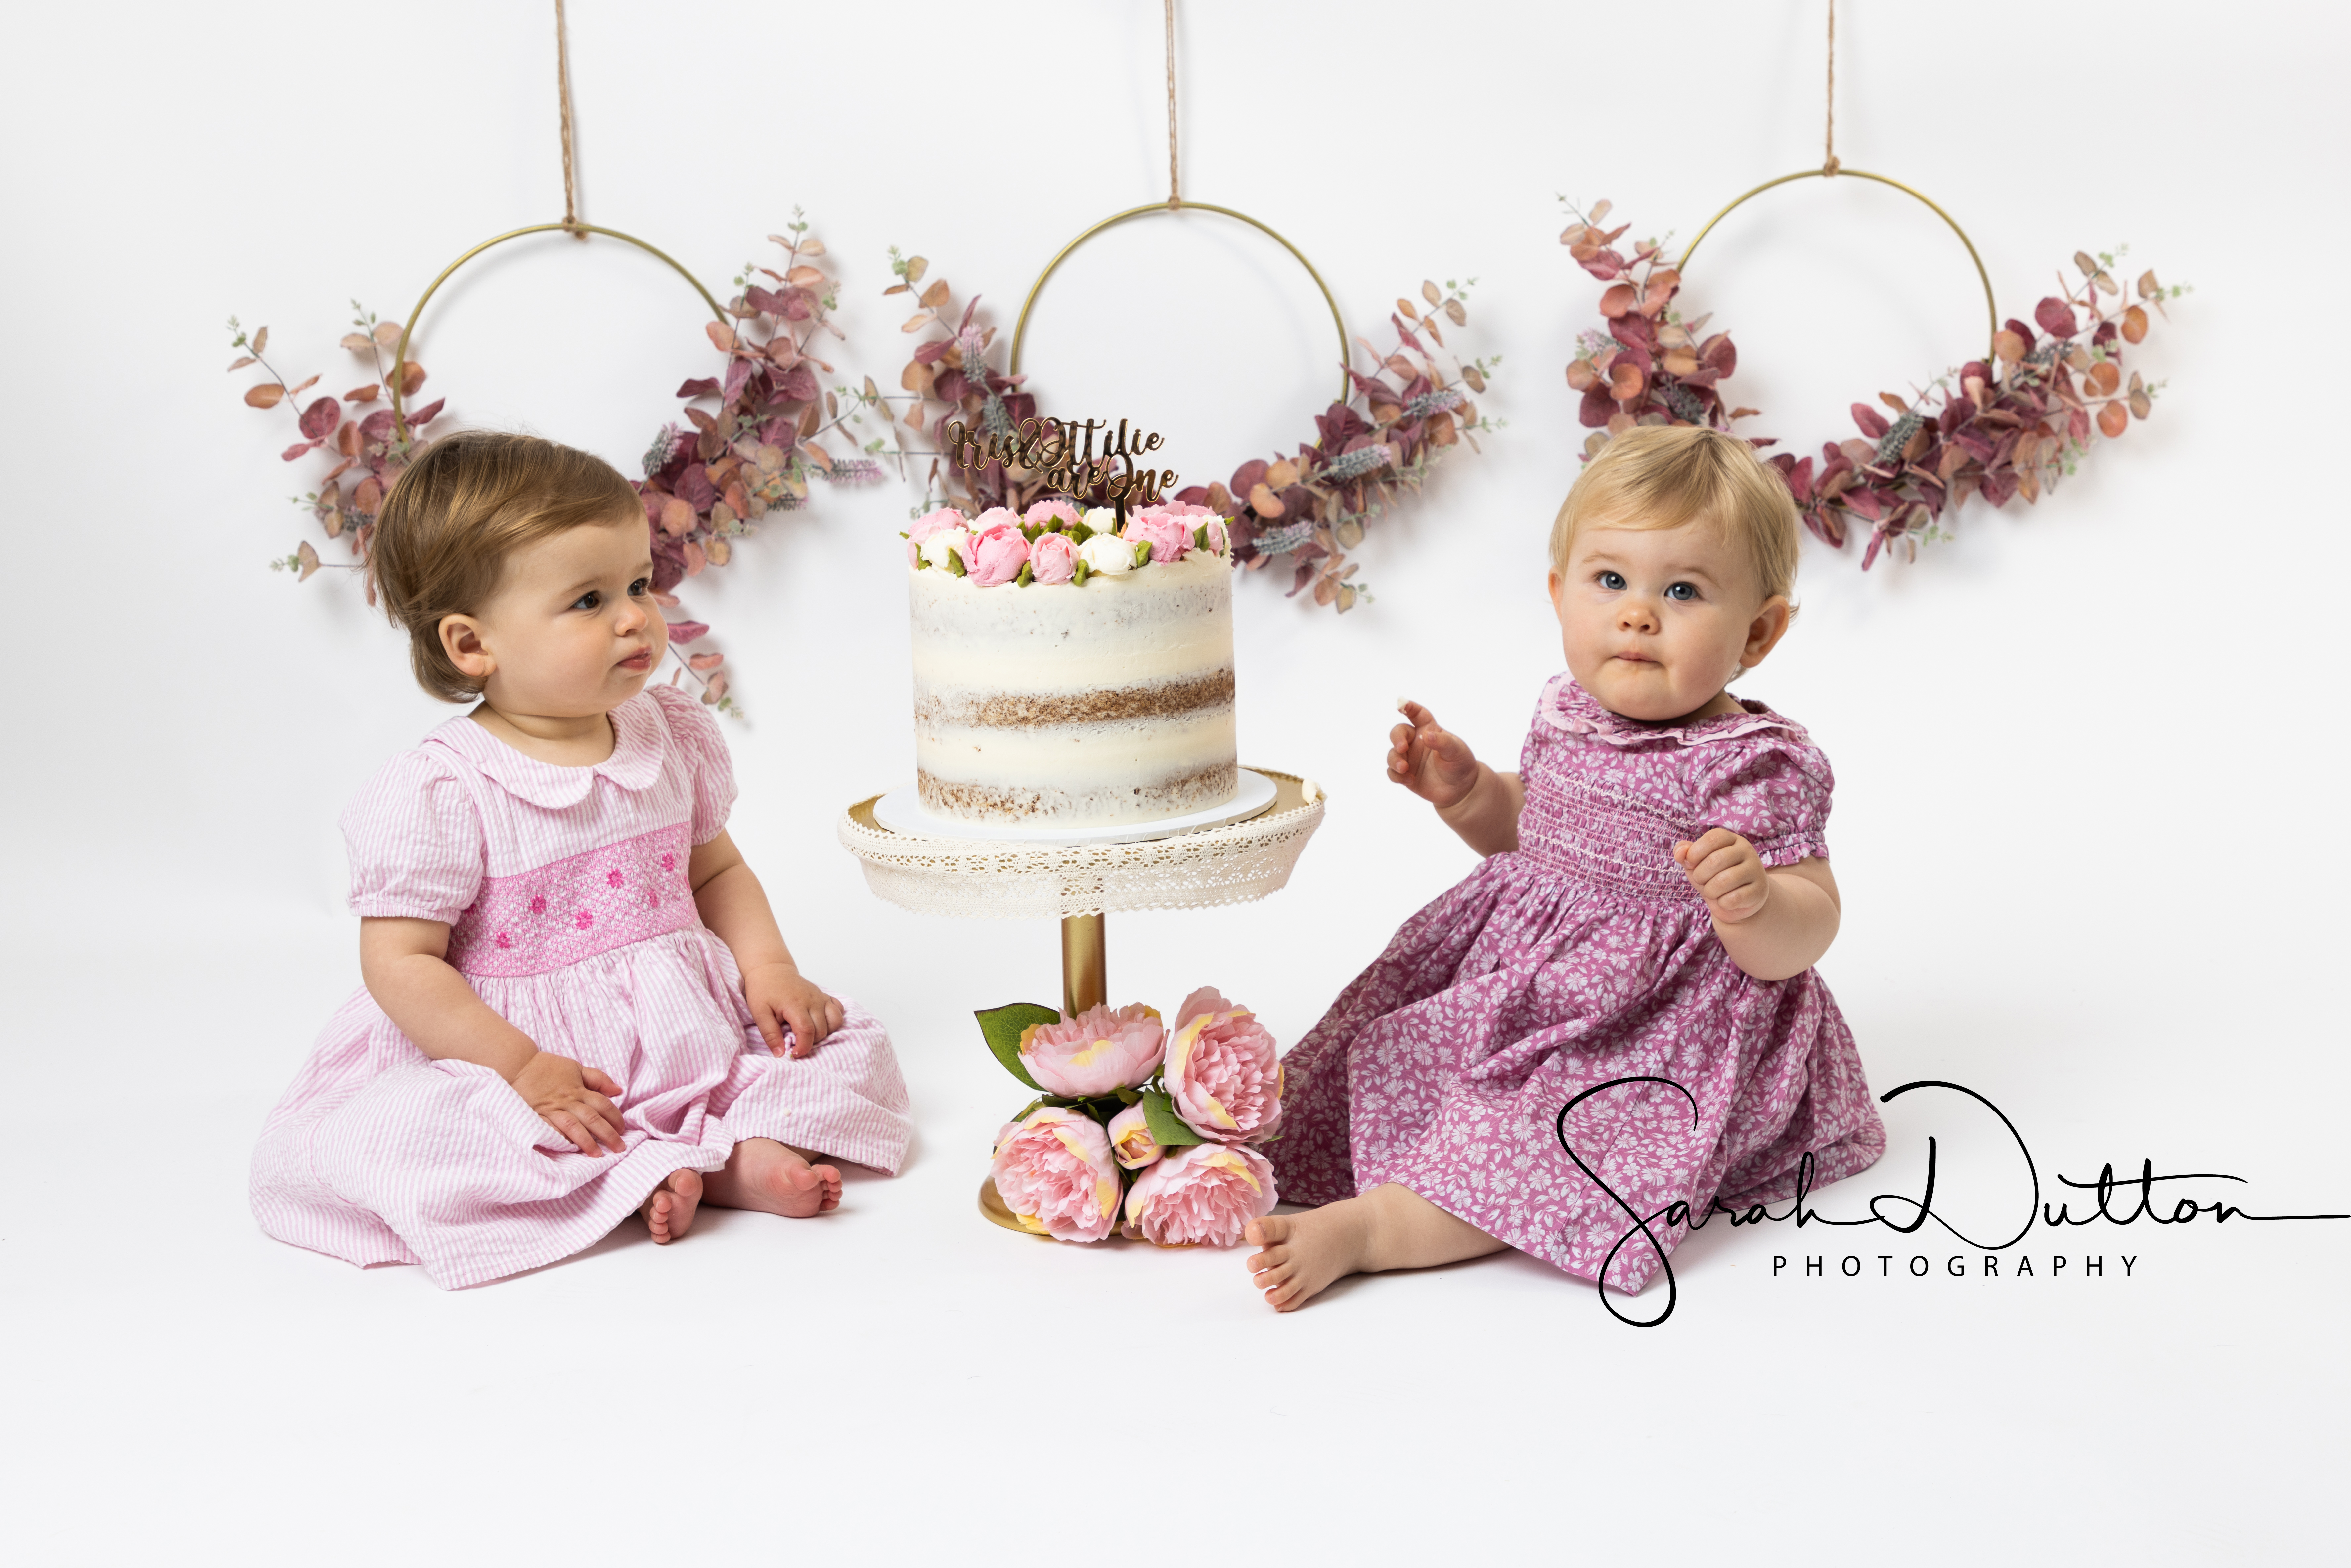 Cake Smash Photography taken by a profession photographer in her studio in Whitchurch Hampshire